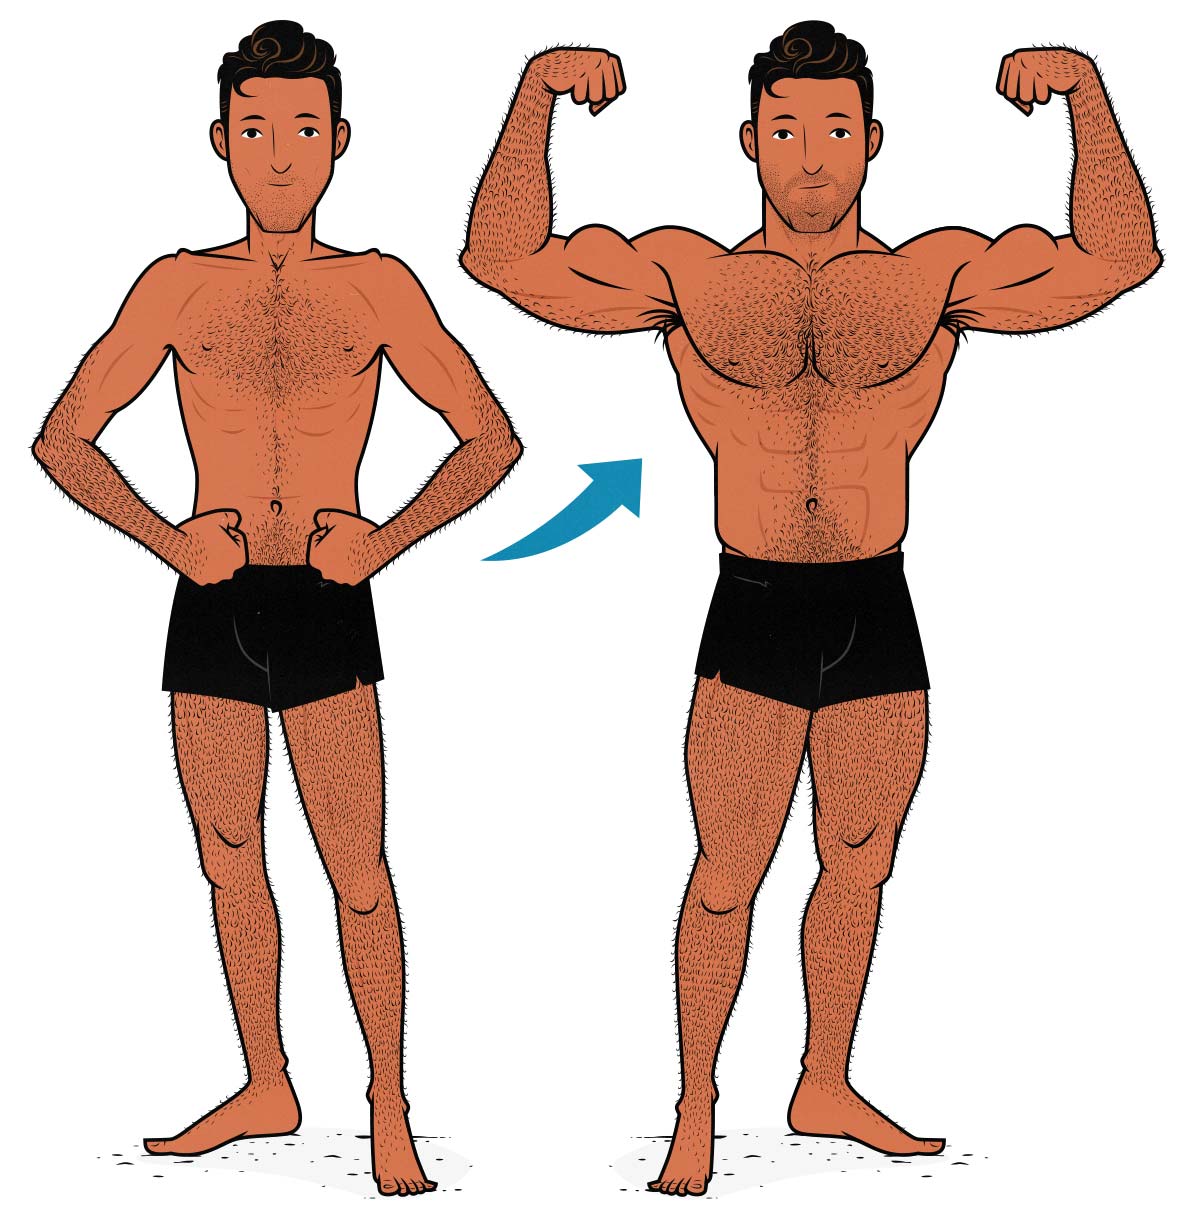 Cartoon illustration of a skinny guy with no abs who is bulking up.